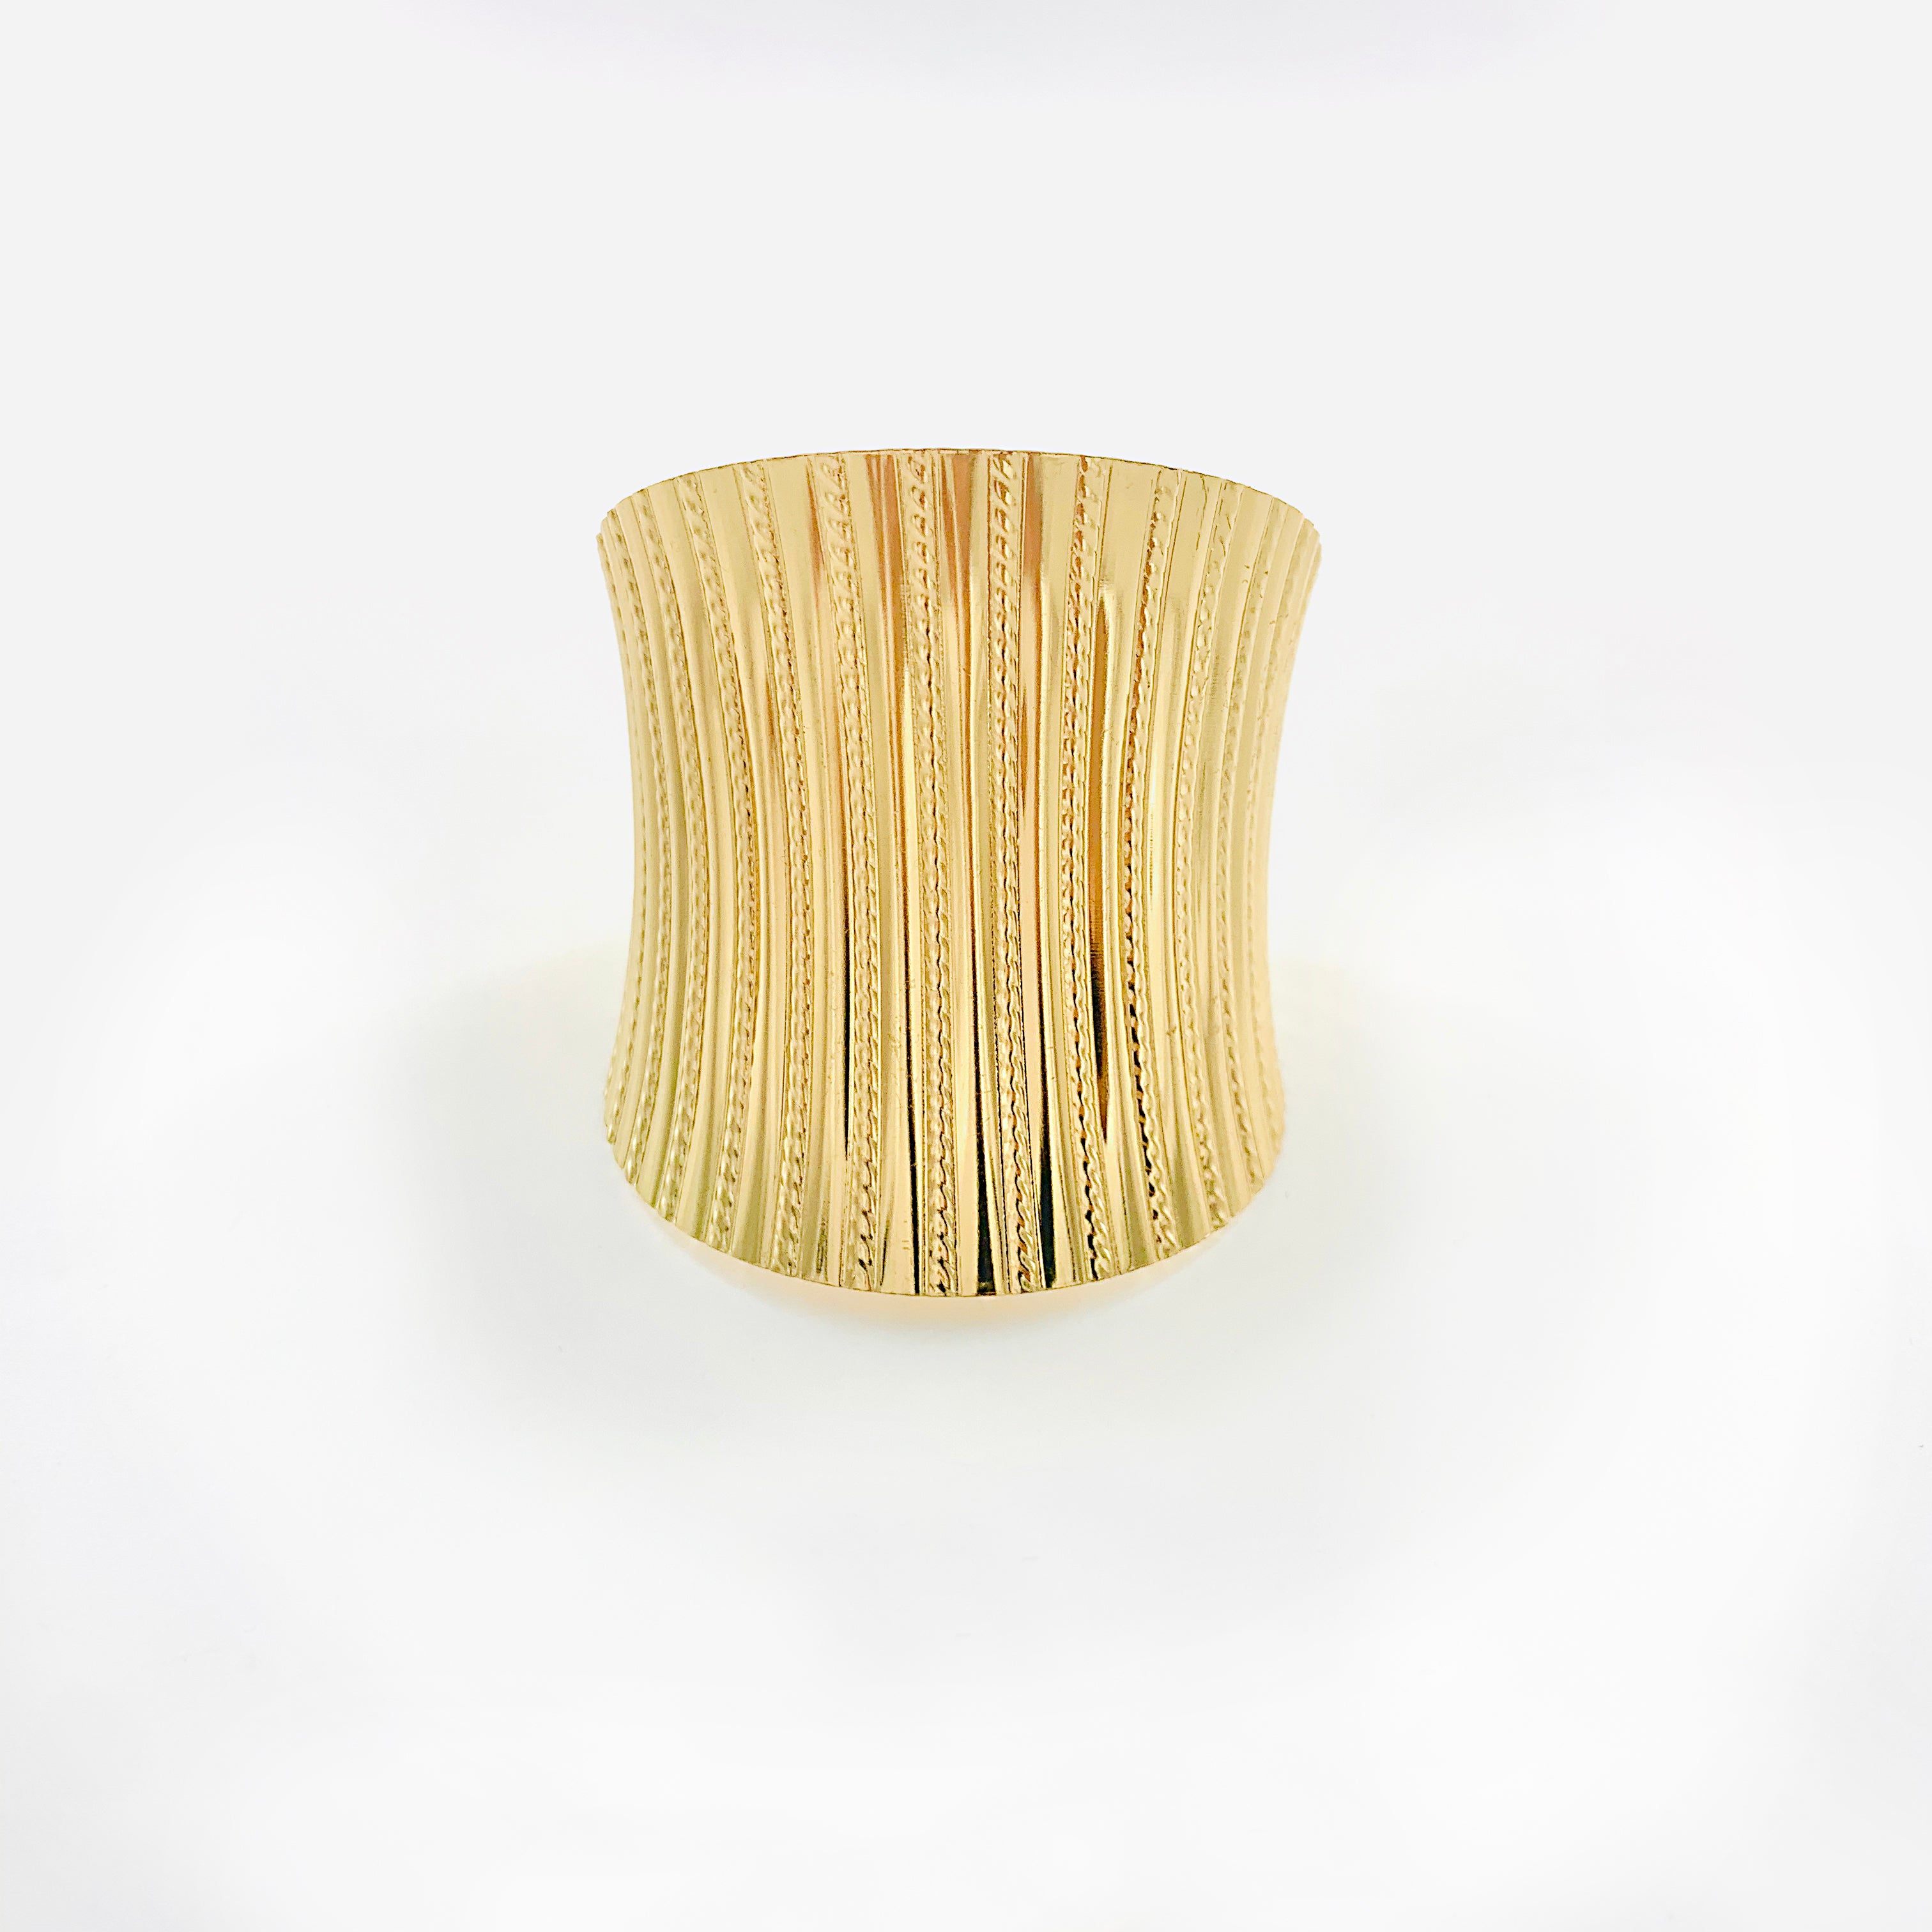 Curved gold cuff with Linear lines